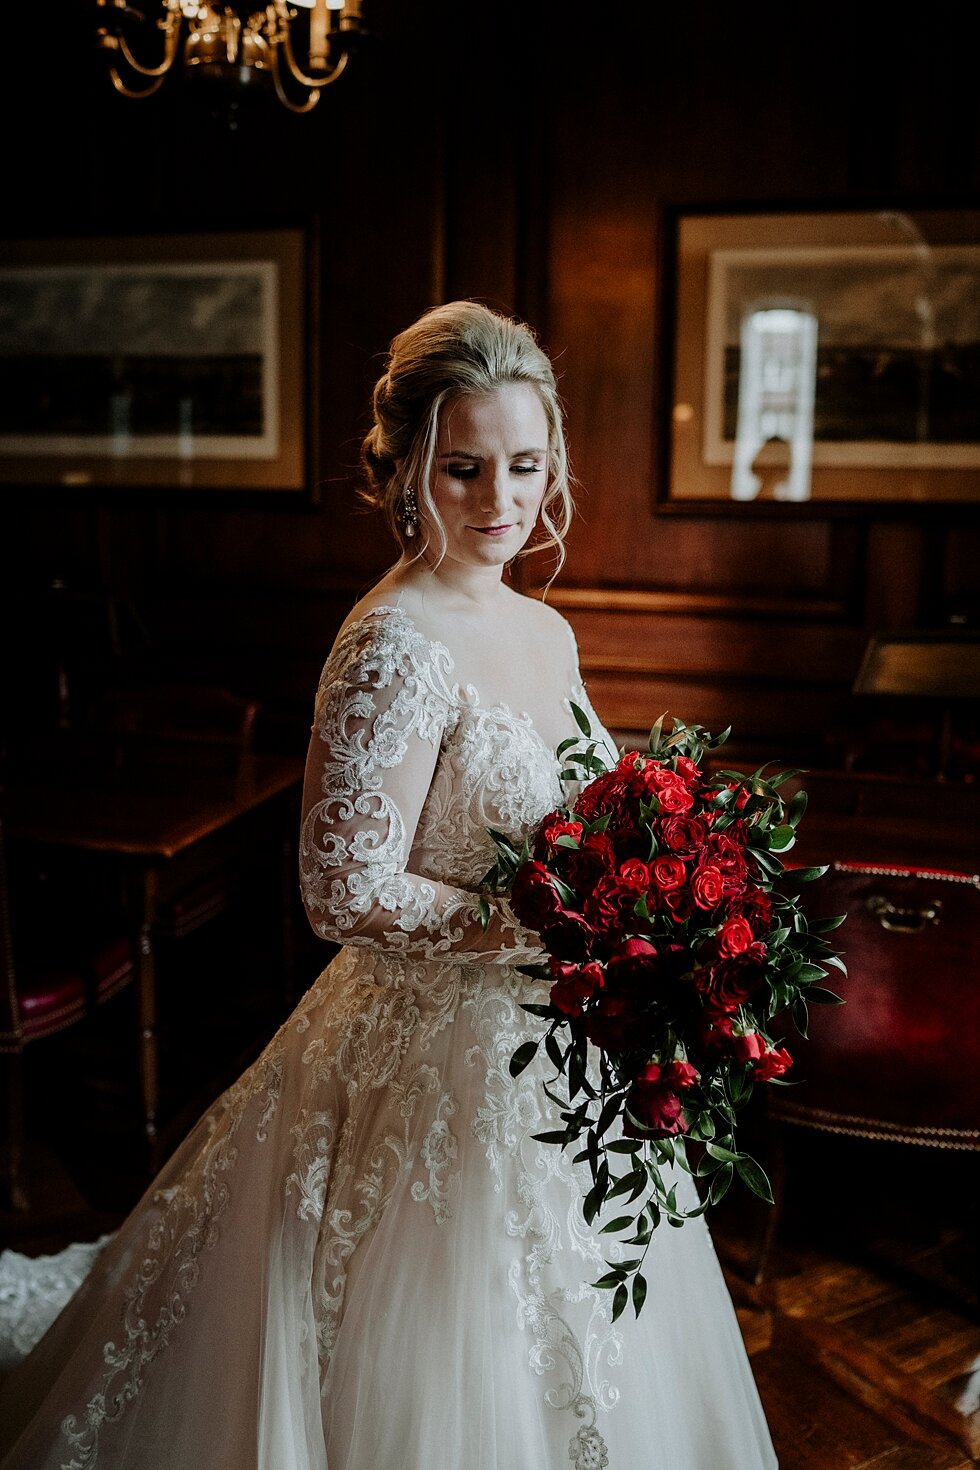  Divine portrait of the bride next to a glowing window on her wedding day just moments before she walks down the aisle to get married. Brisk February winter wedding Pendennis Club Louisville, Kentucky southern wedding bride and groom carefree wedding